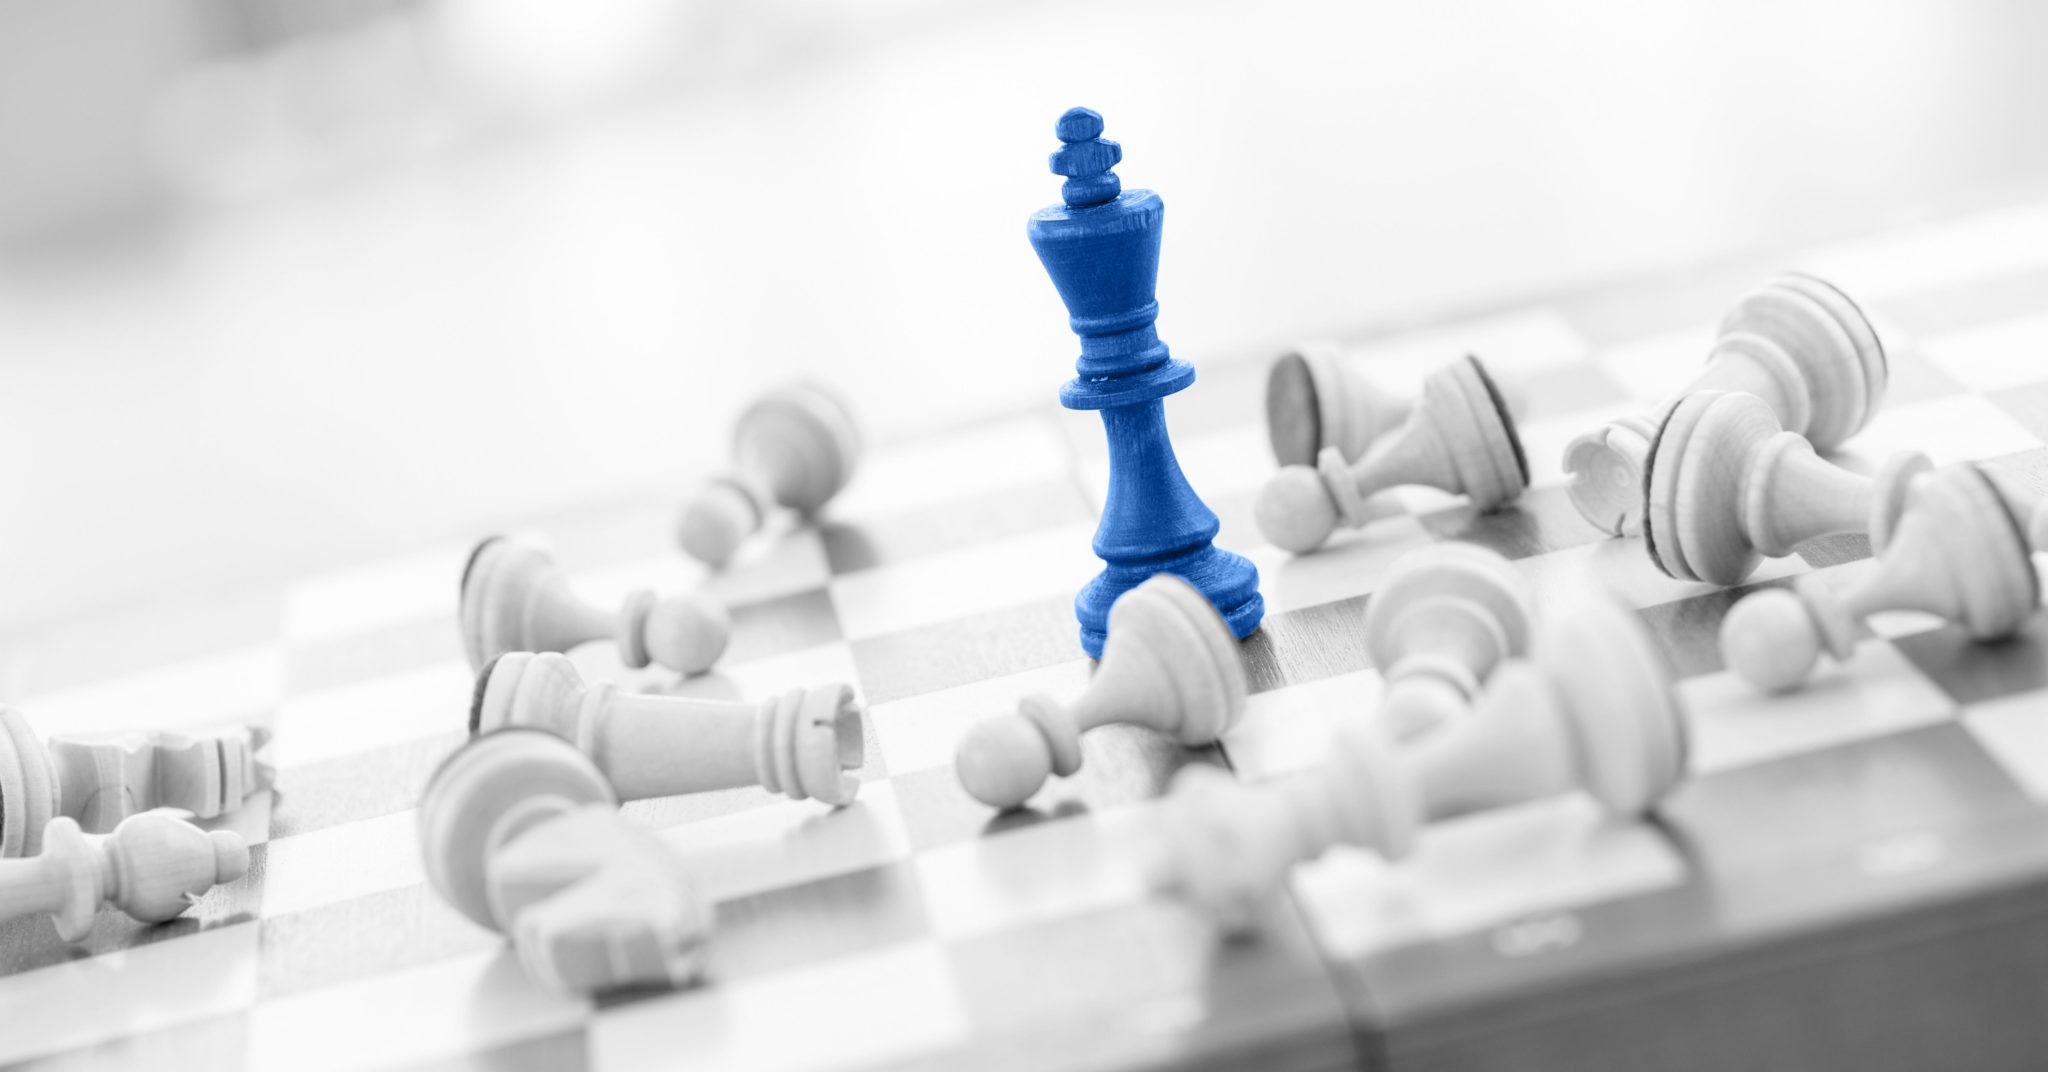 Chess board with one blue chess piece representing business innovation left standing and all white pieces knocked down